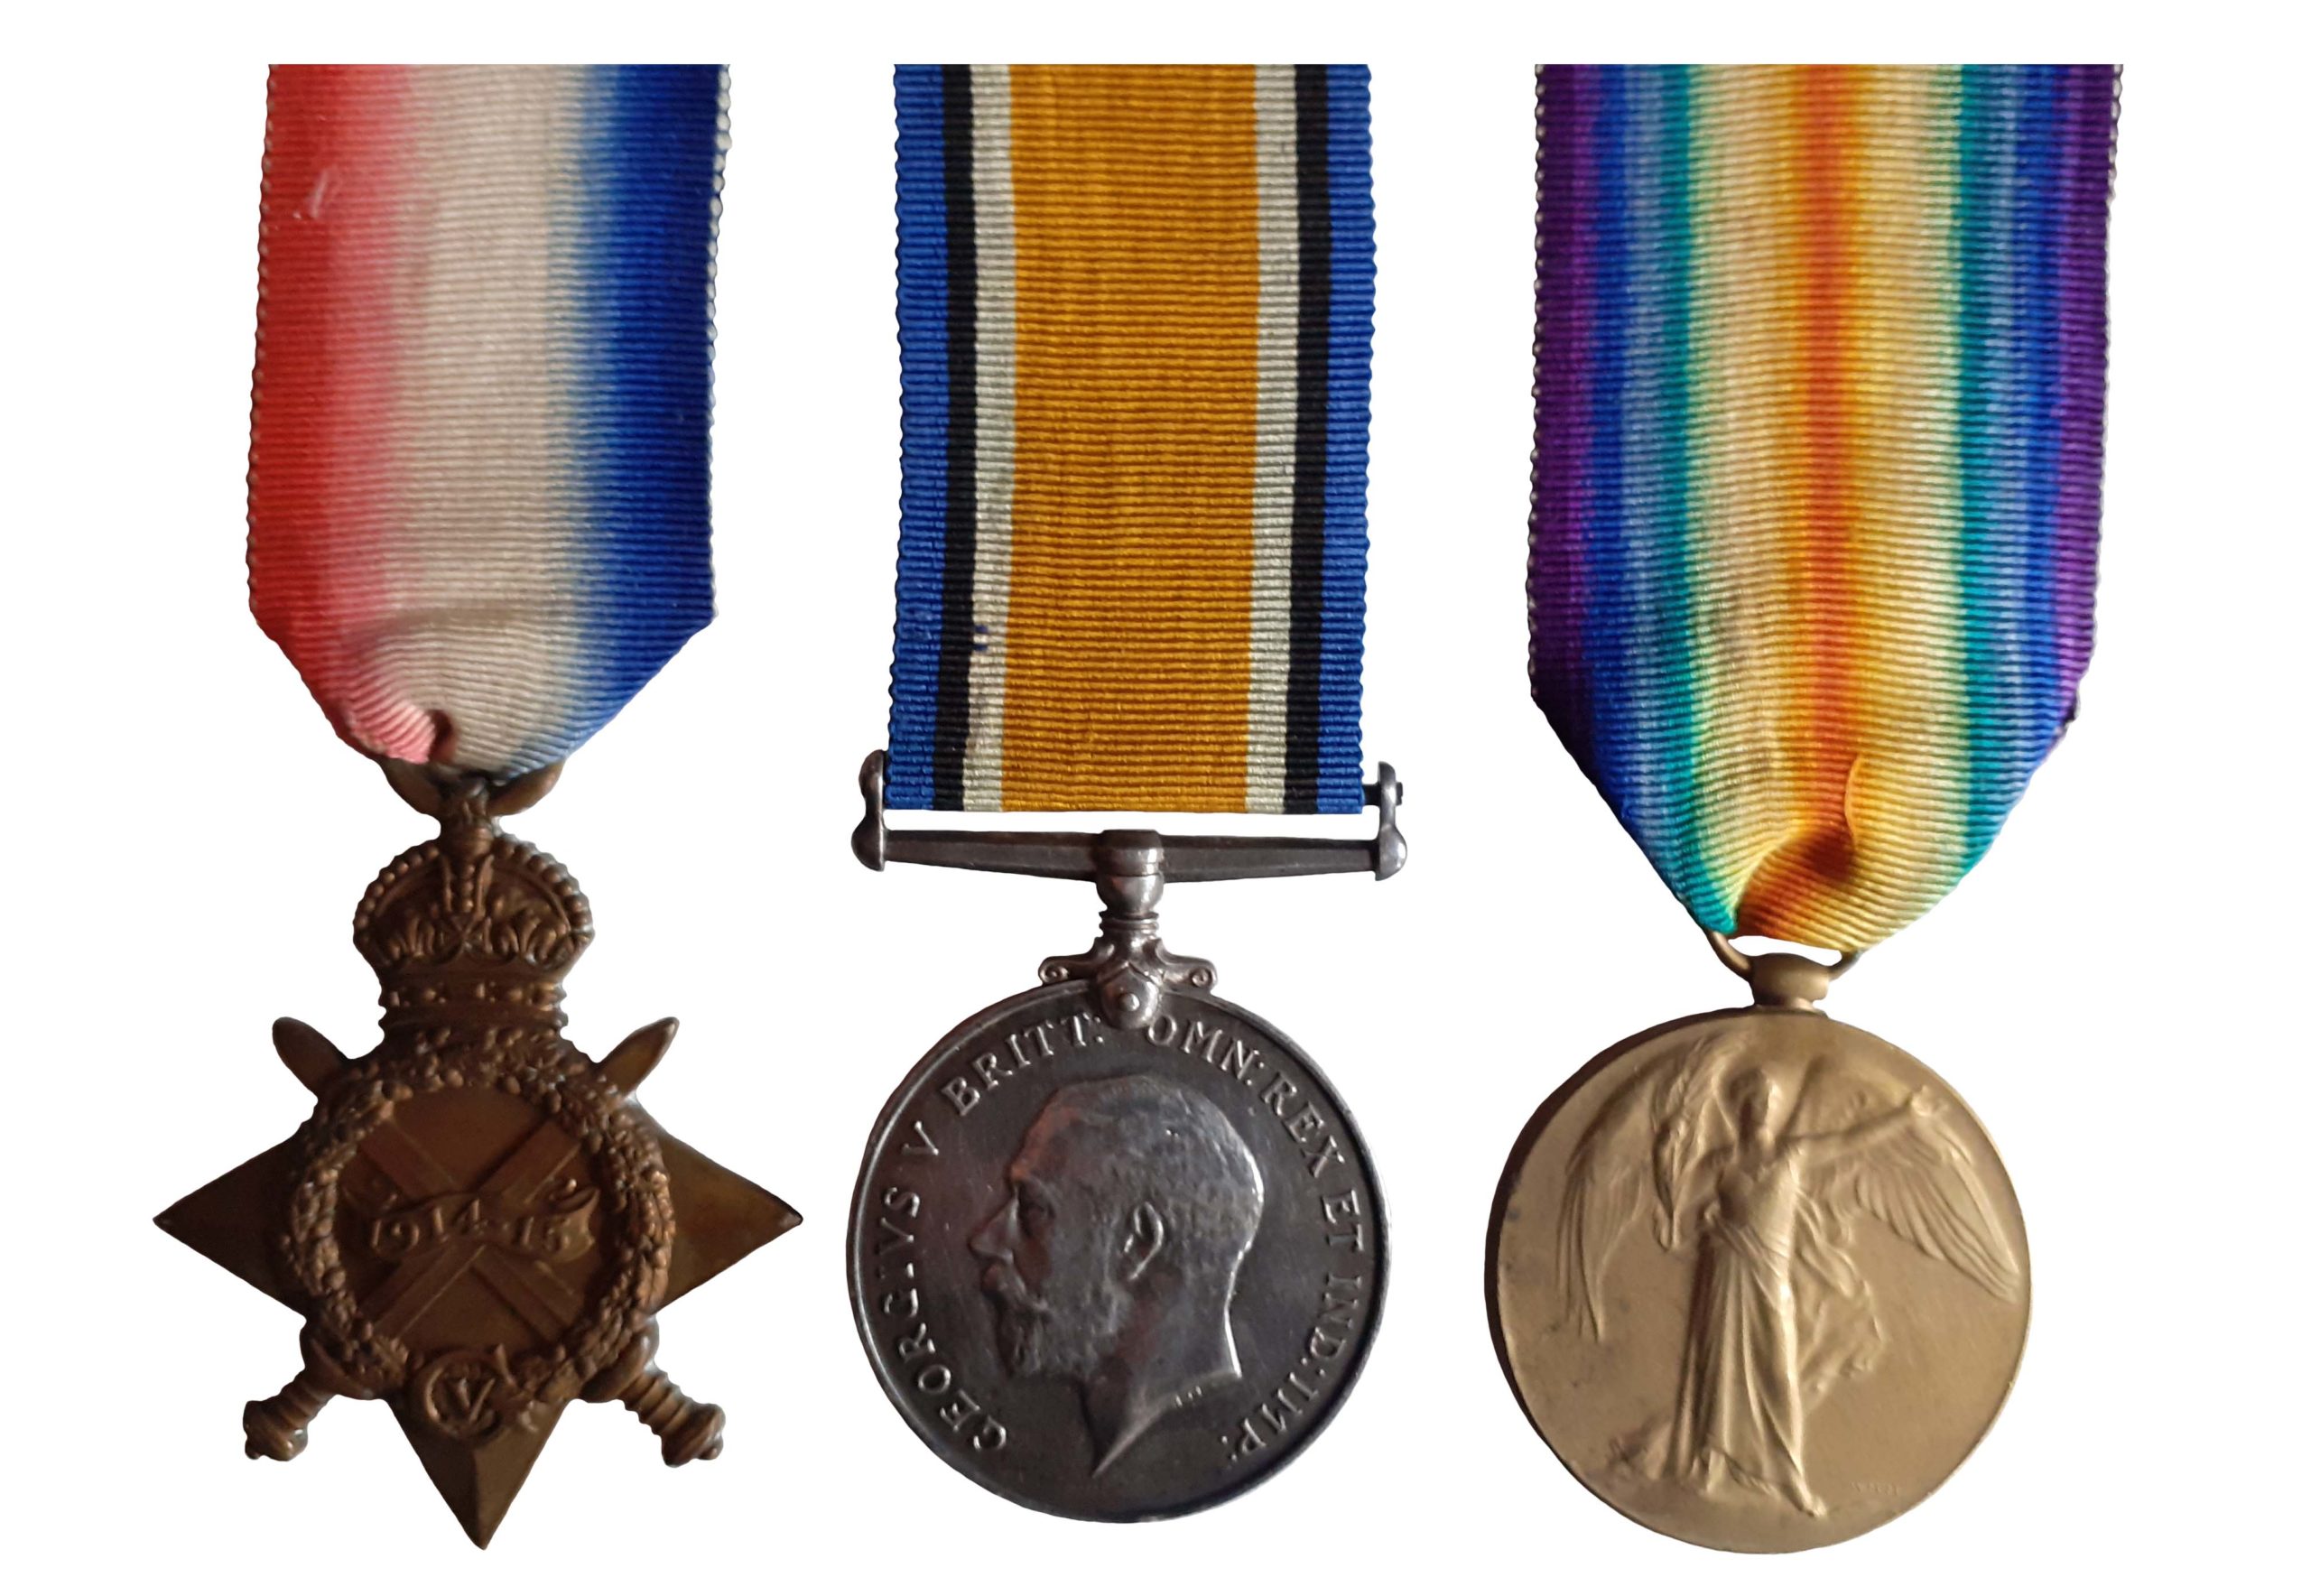 1914-15 Trio awarded to Private Harry W.B. Cox, Royal Army Medical Corps